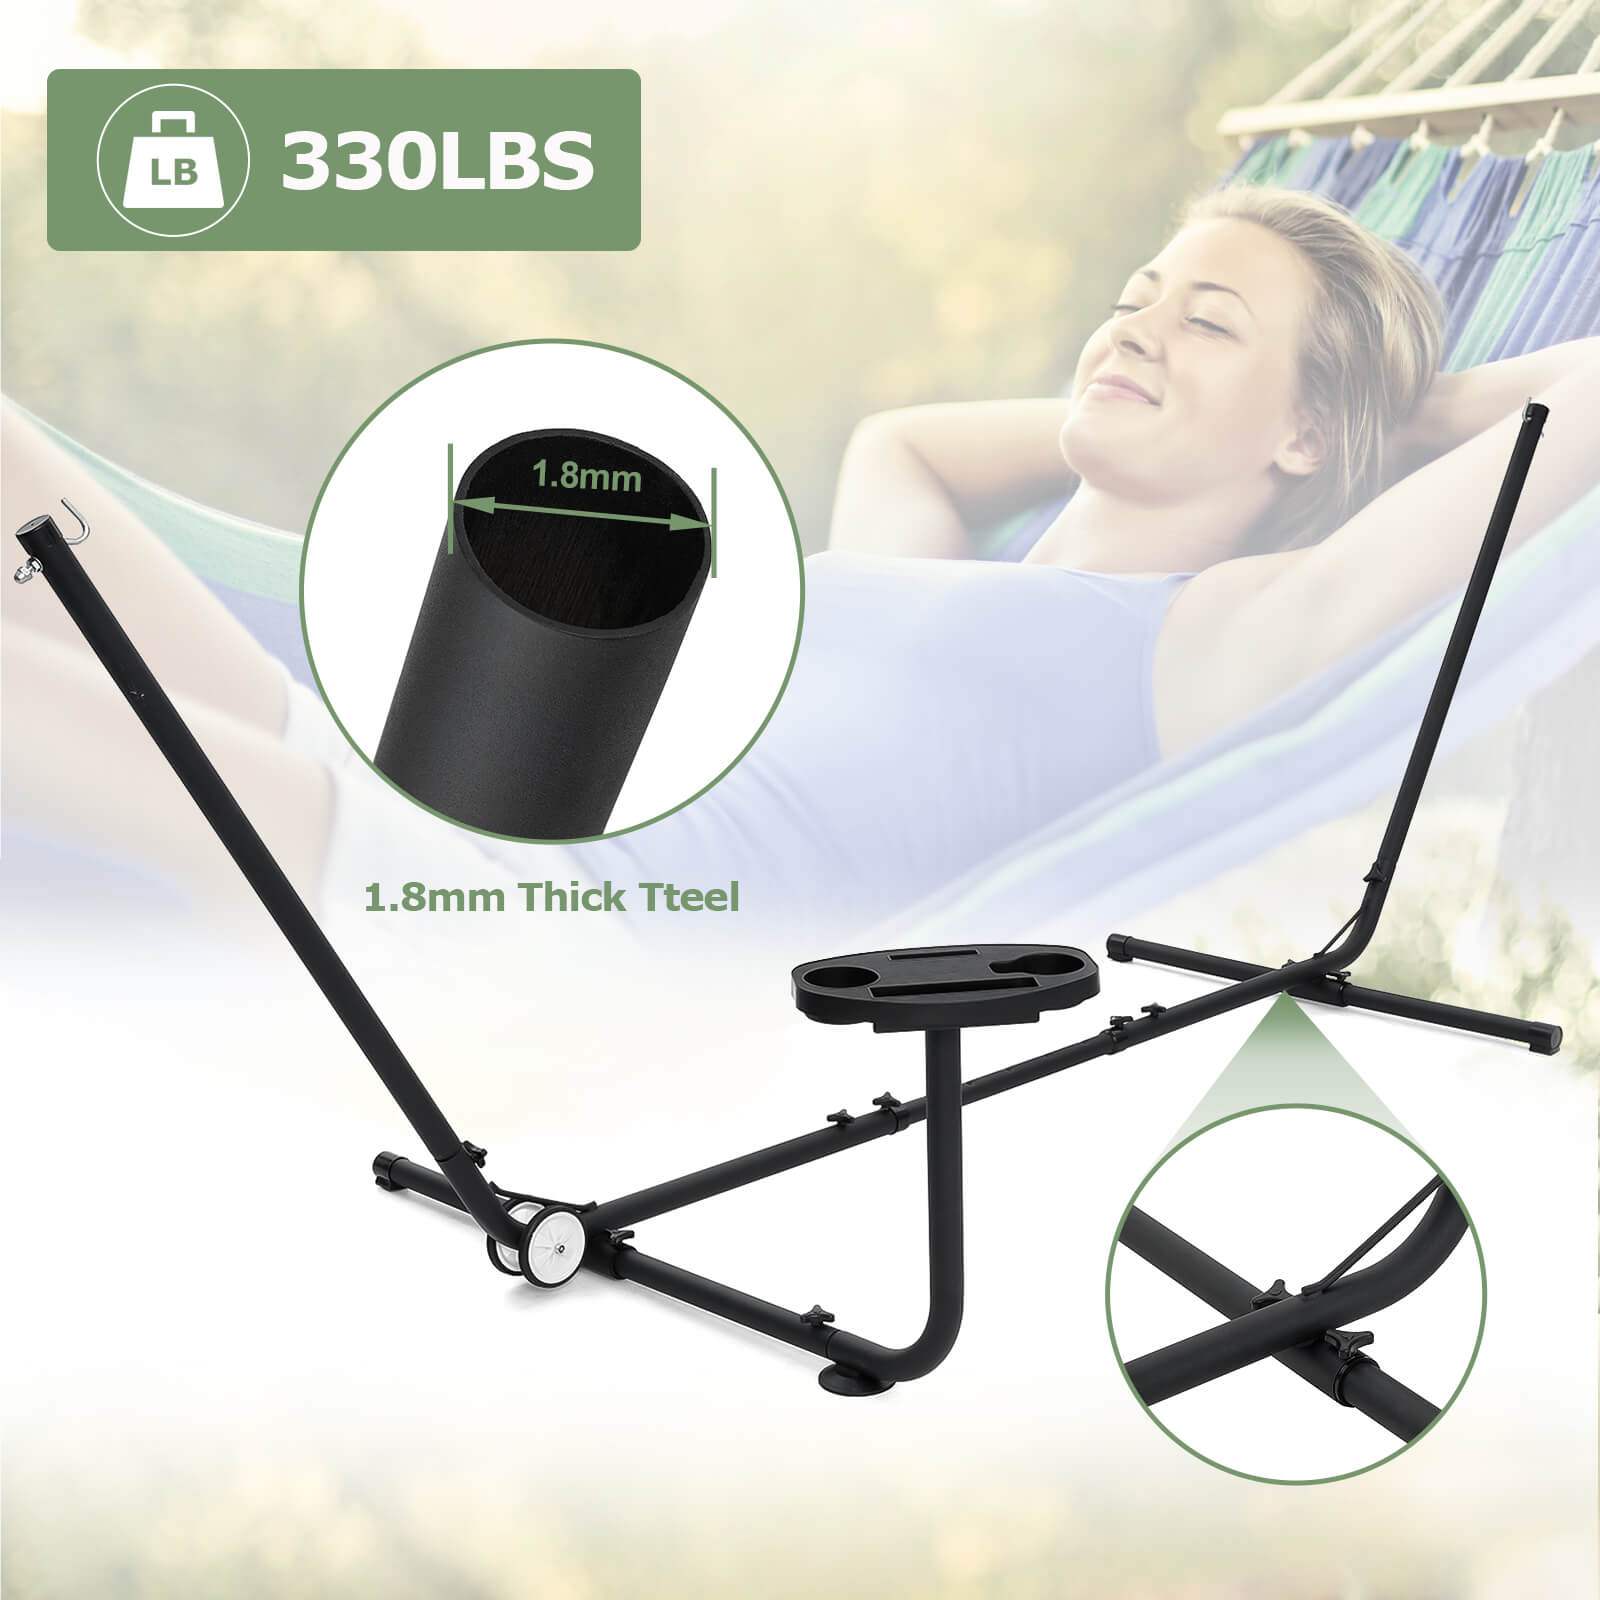 Hammock Stand Only Portable Hammock Stand Heavy Duty 2 Person Hammock Stands with Built-in Wheel and Carrying Bag for Outdoor Indoor, 330lbs Capacity Black